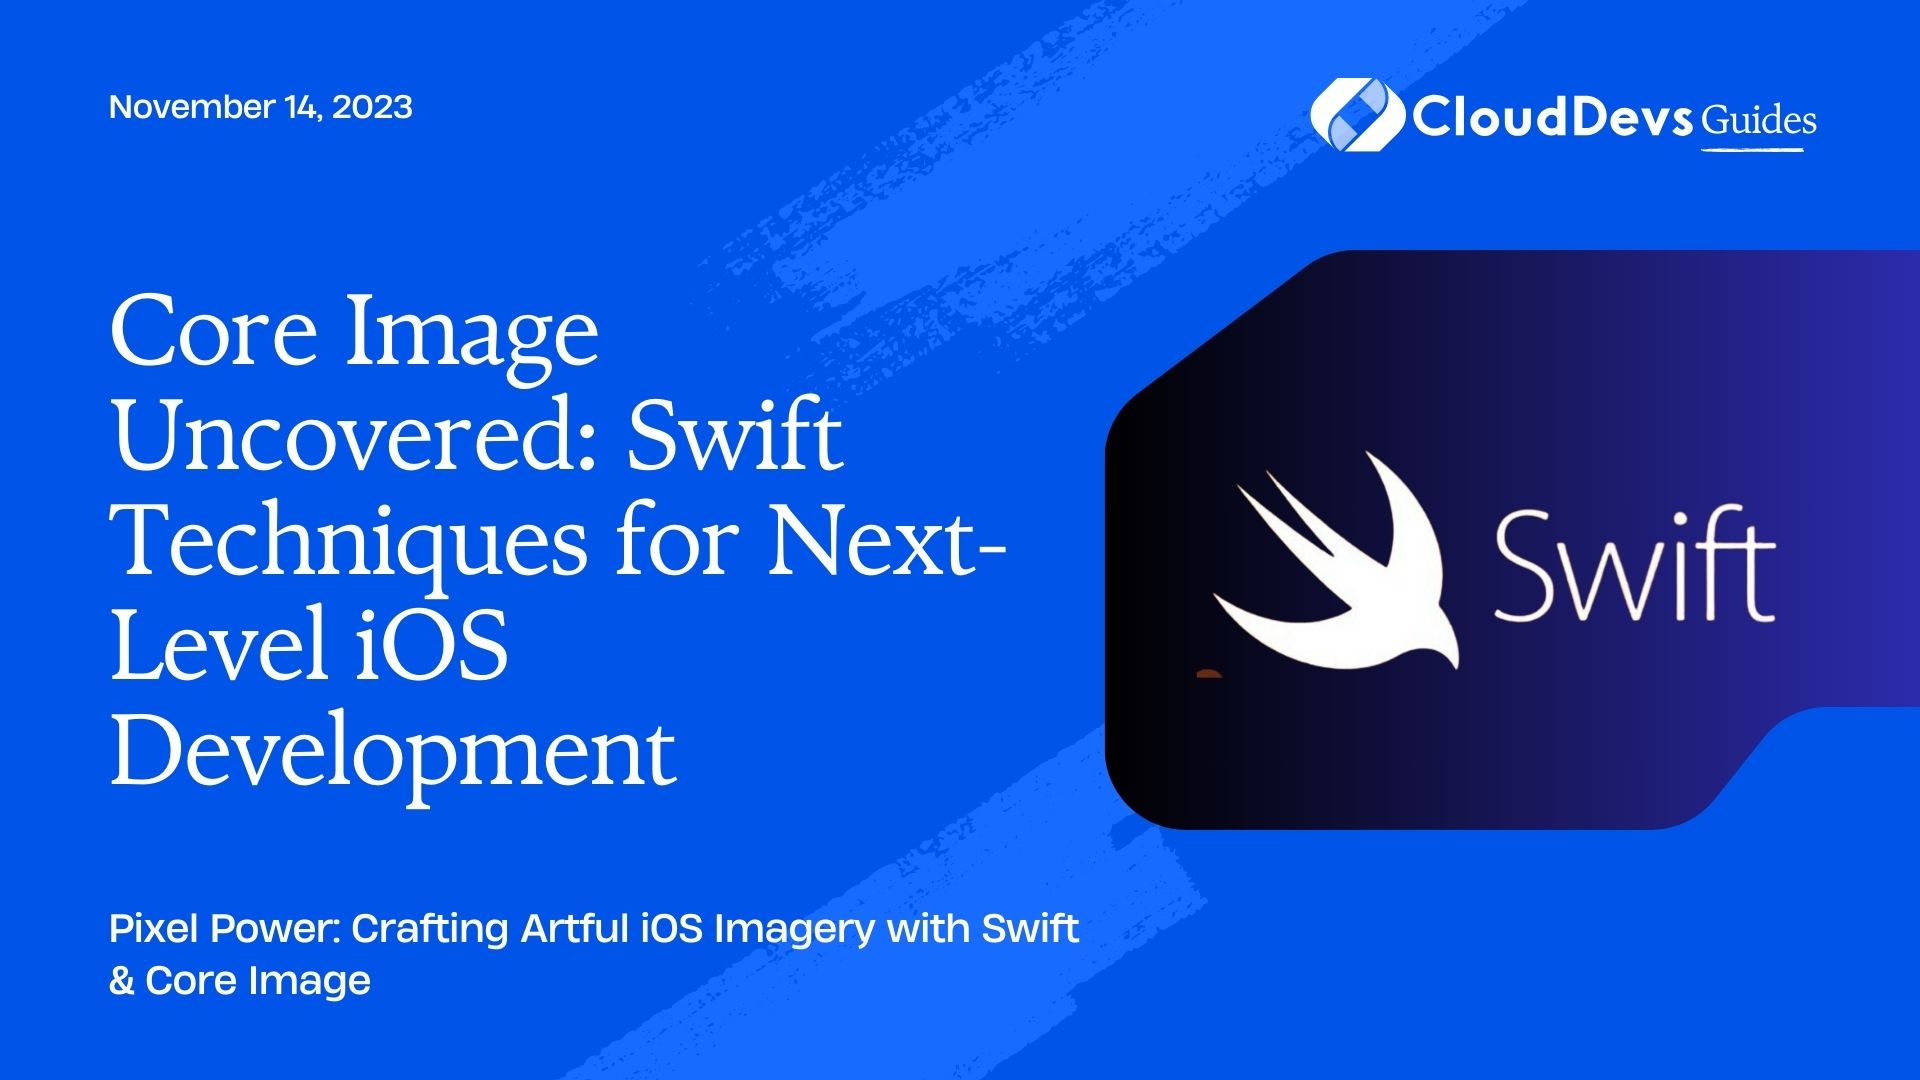 Core Image Uncovered: Swift Techniques for Next-Level iOS Development